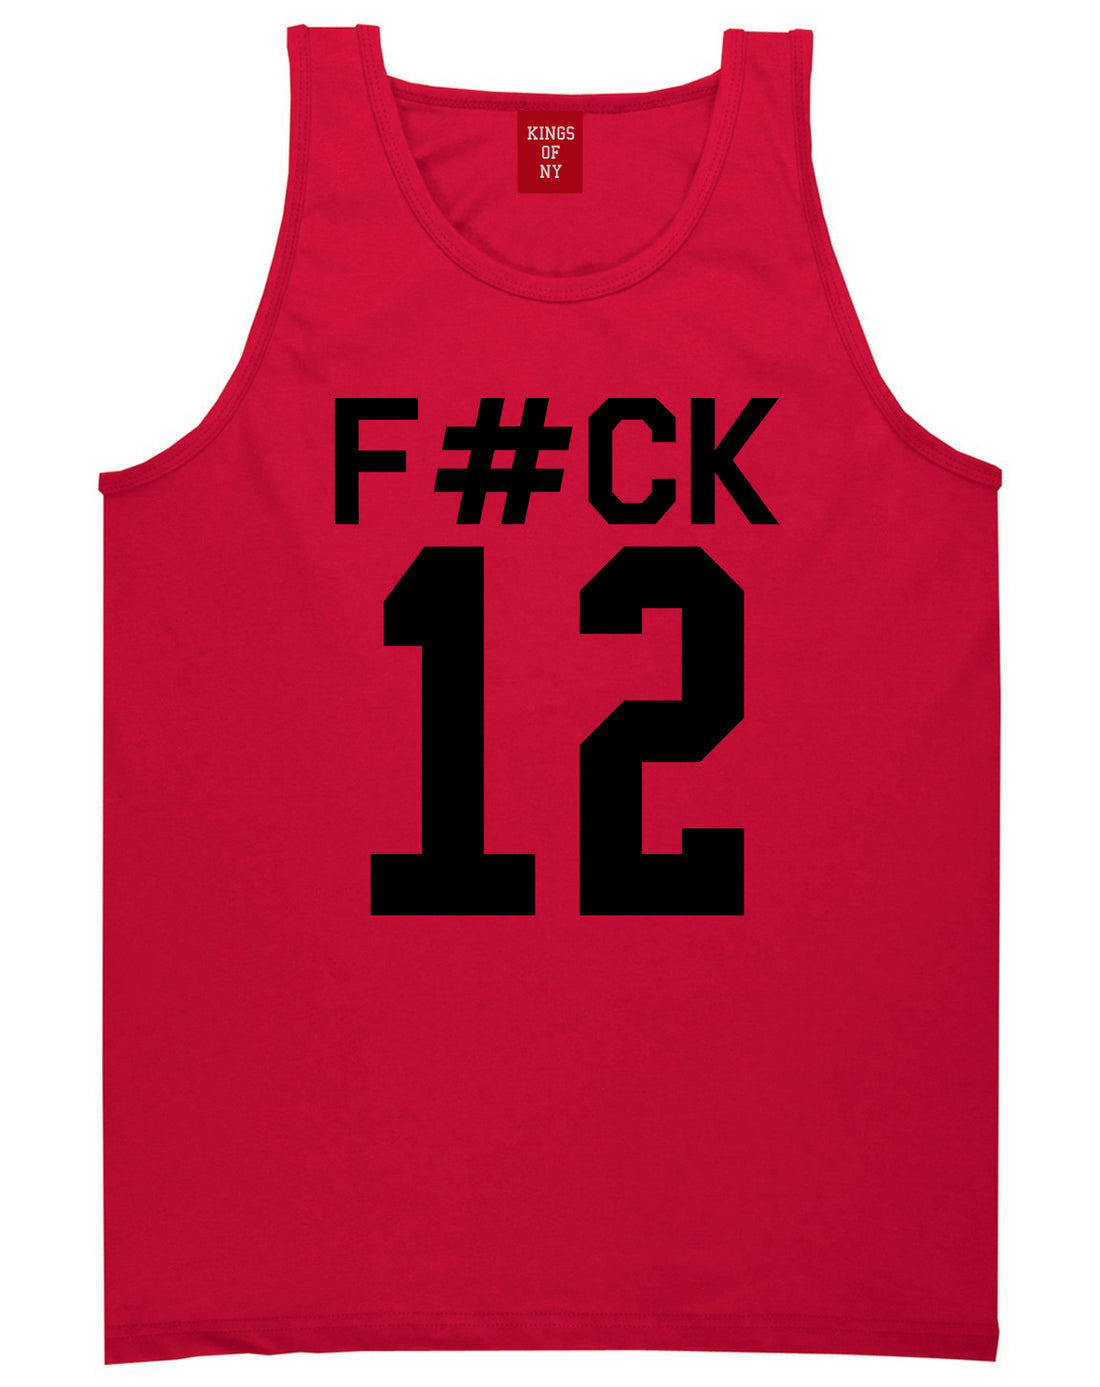 Fck 12 Police Brutality Mens Tank Top Shirt Red by Kings Of NY